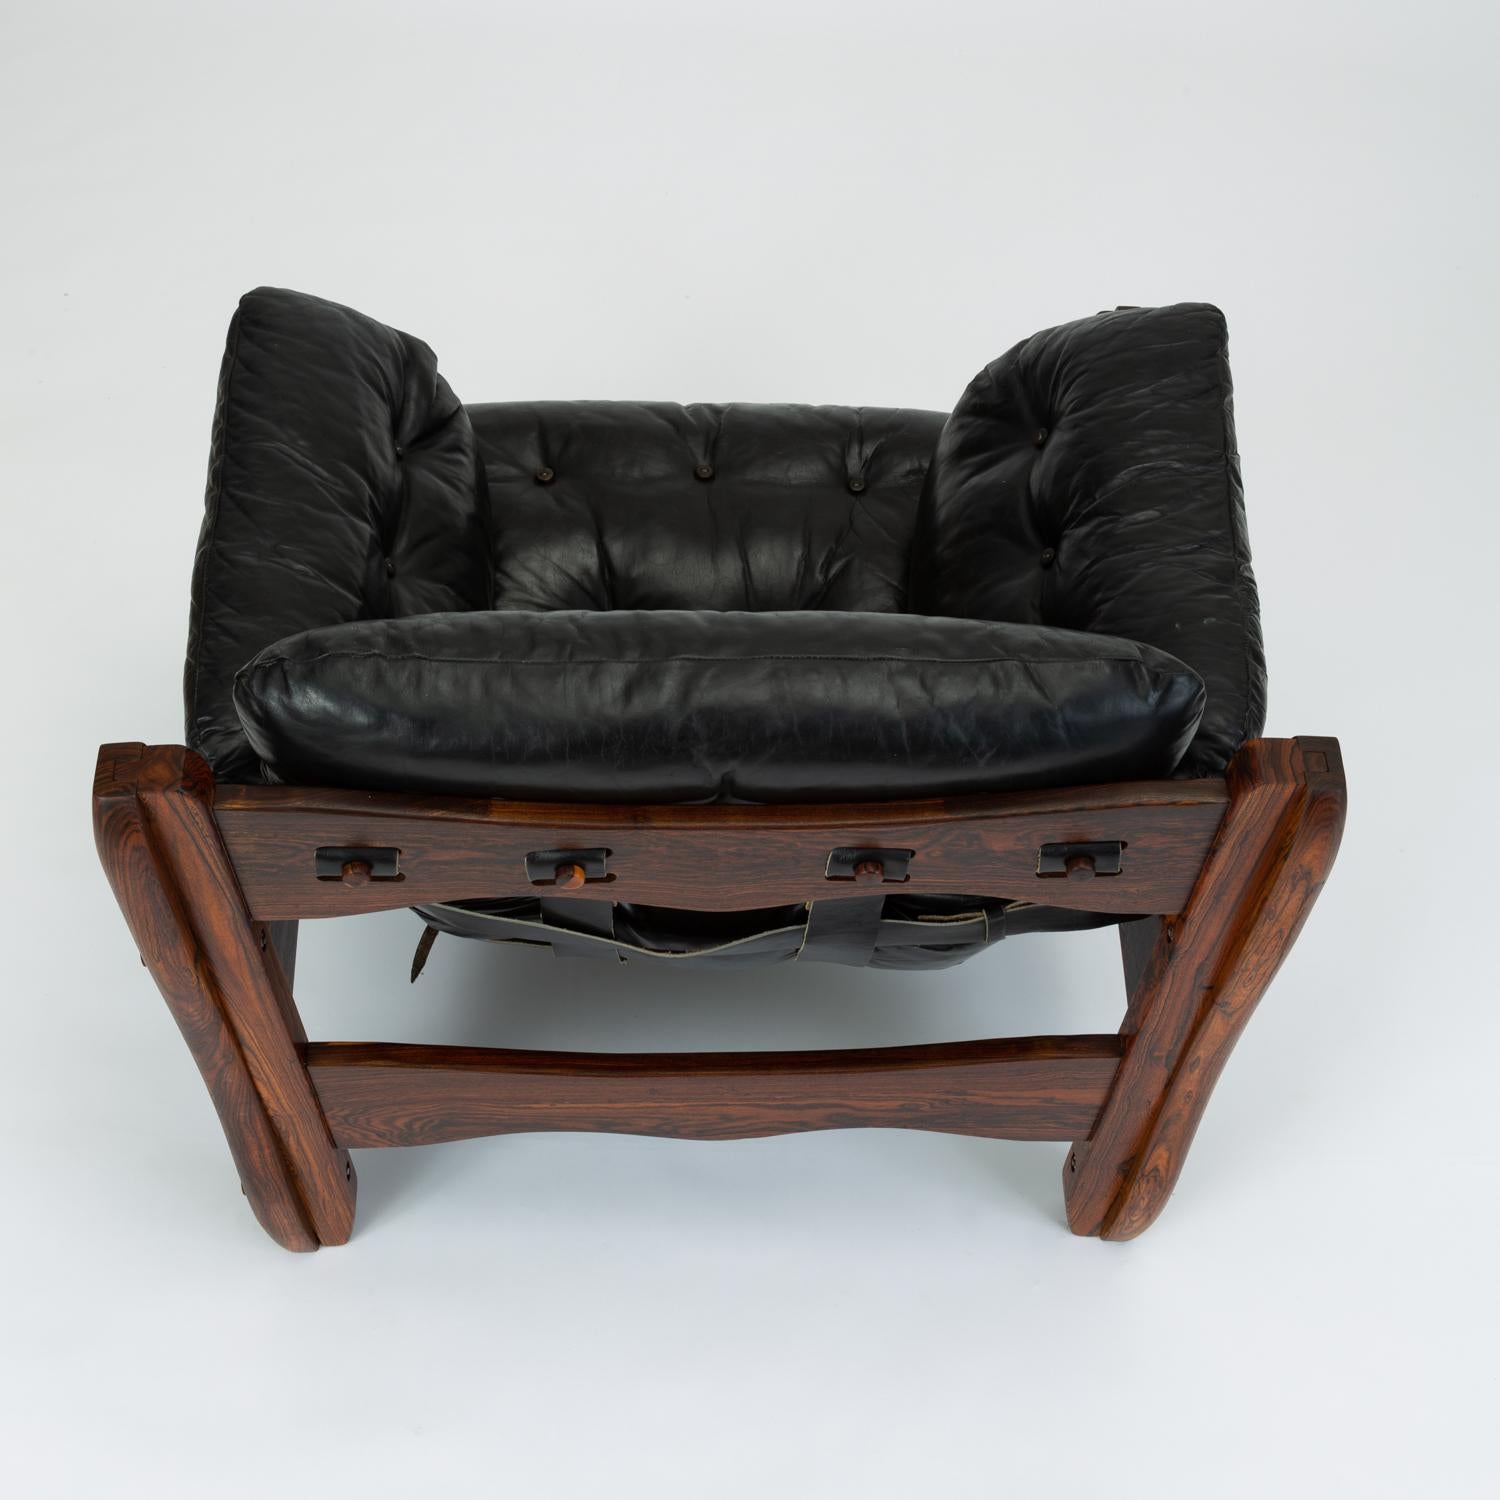 Descanso Lounge Chair by Don Shoemaker for Señal in Cueramo and Leather 3